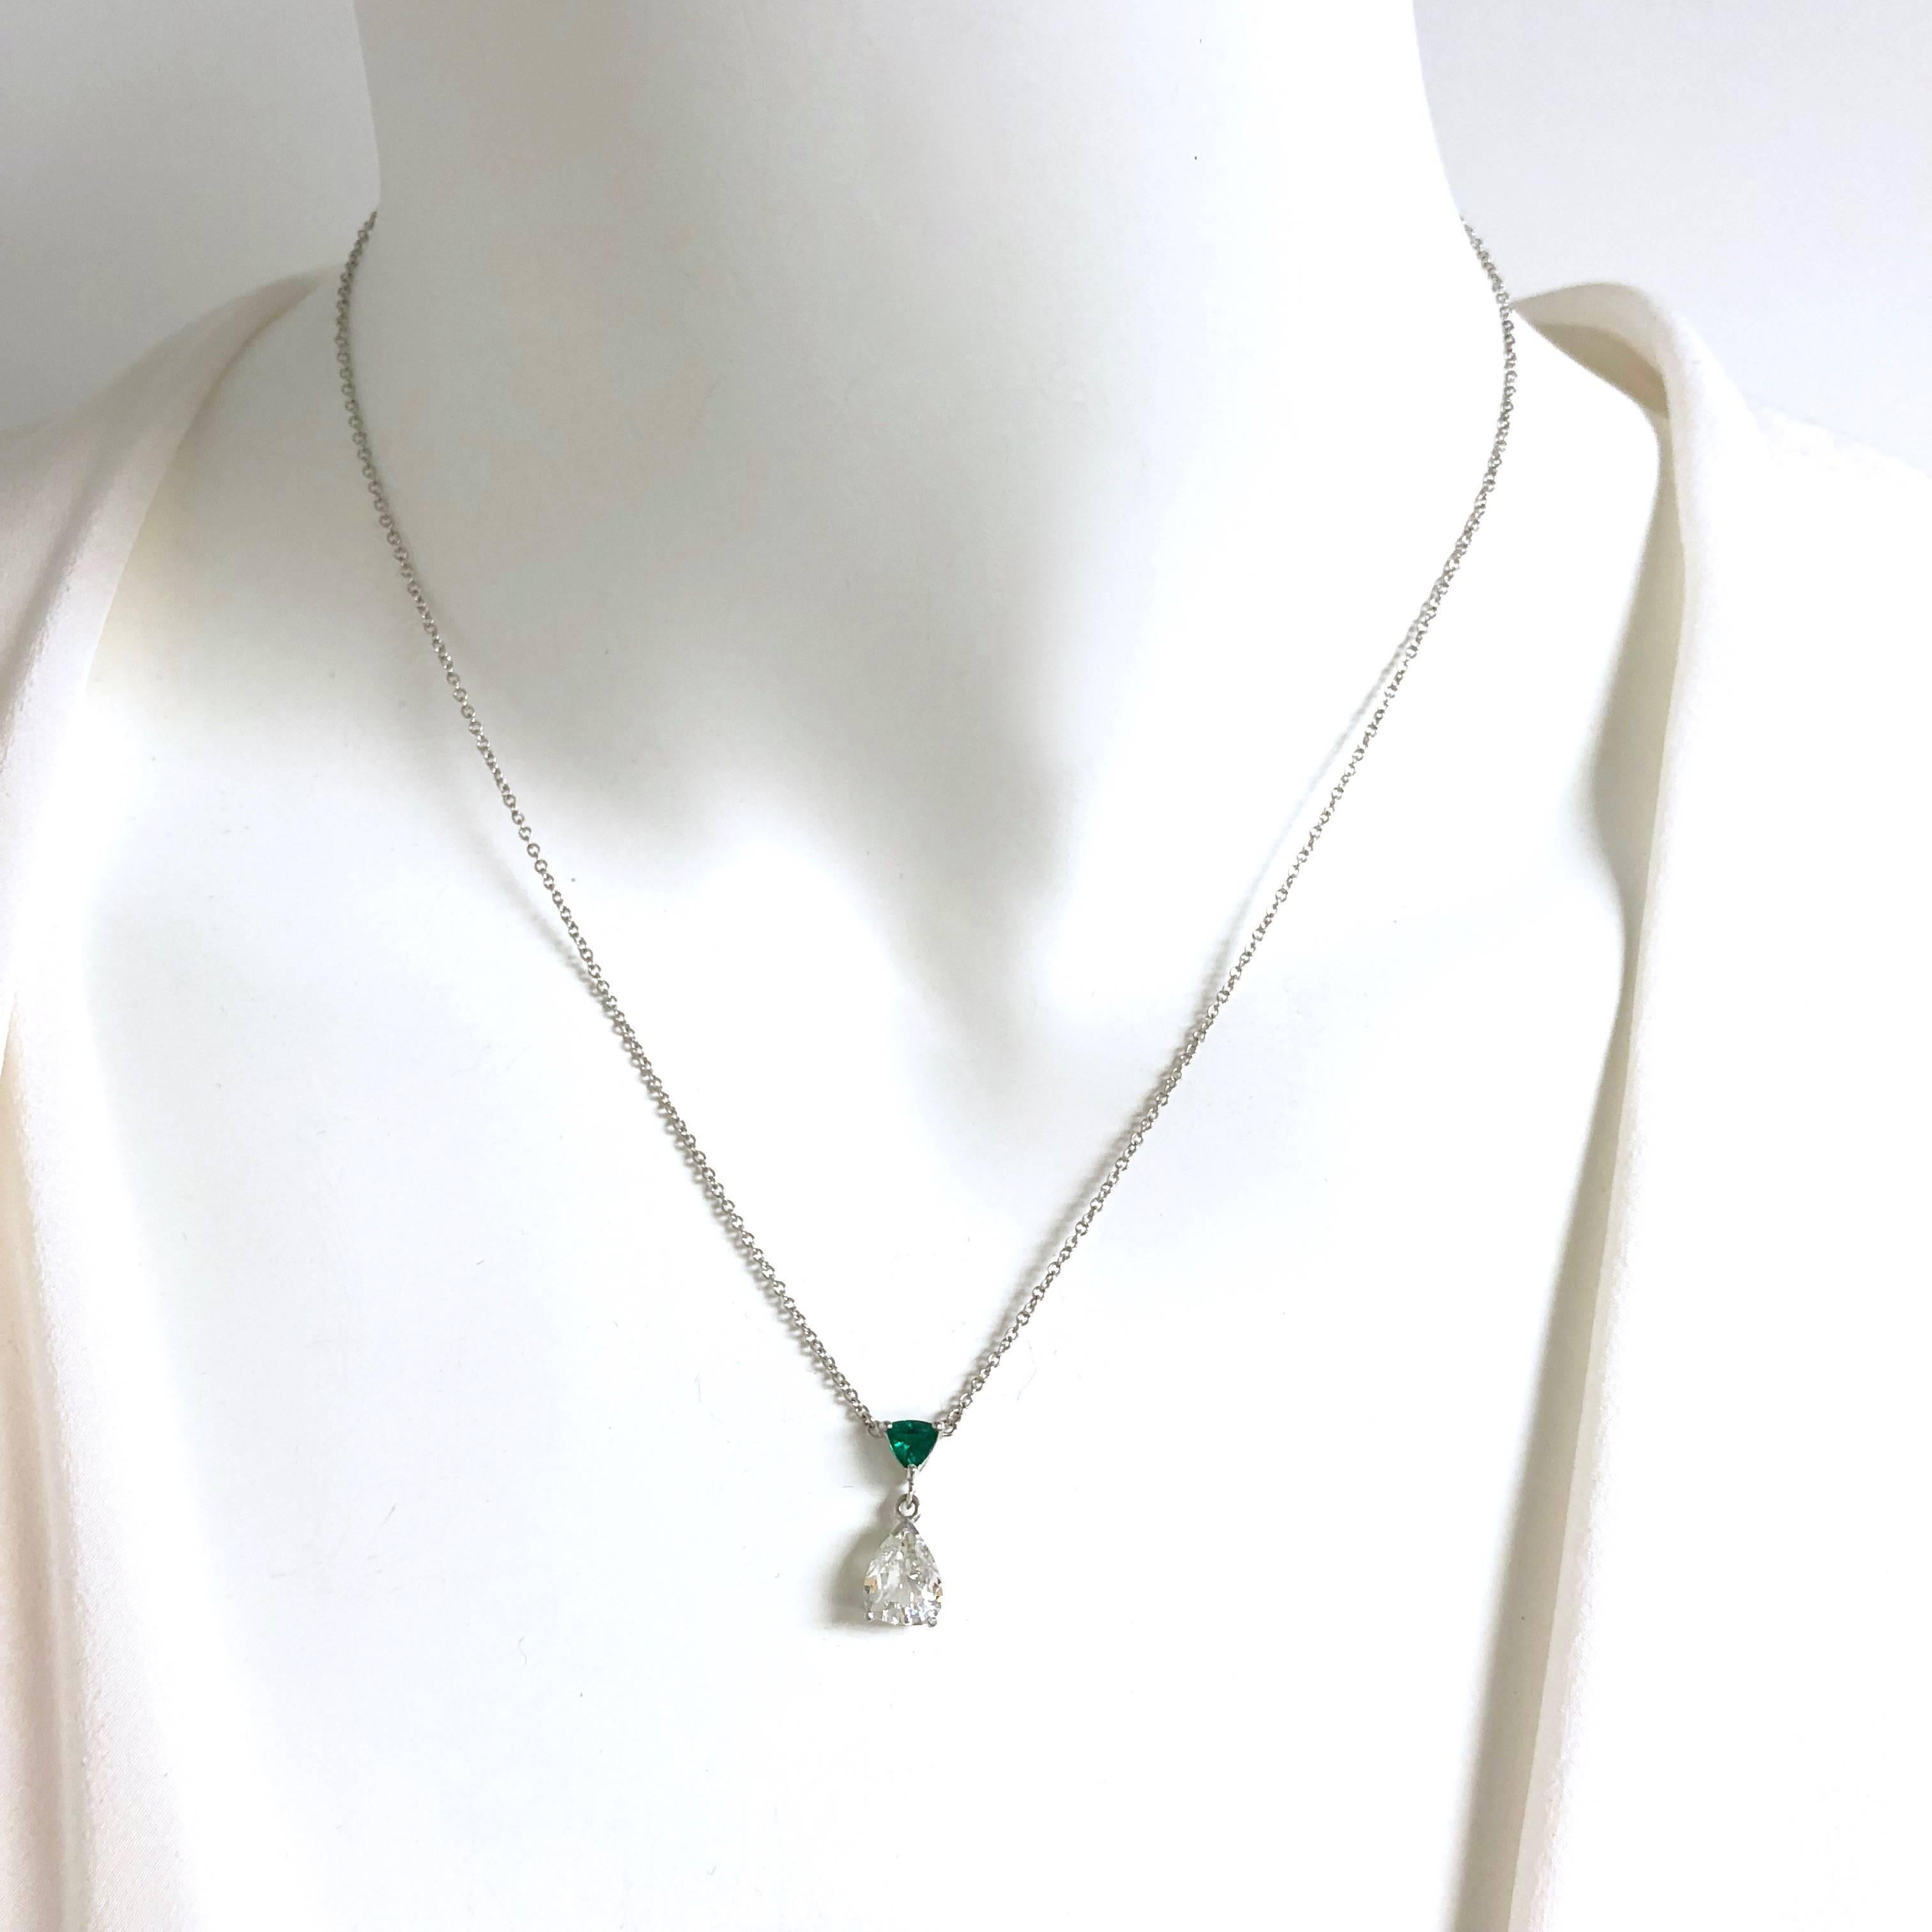 Crafted in 14K white gold, the necklace features a pear shape diamond solitaire supported by a triangle shaped vivid green natural emerald and a seventeen inch length rolo style chain terminating in s spring ring clasp.
Diamond: 0.90ct, Color: H,